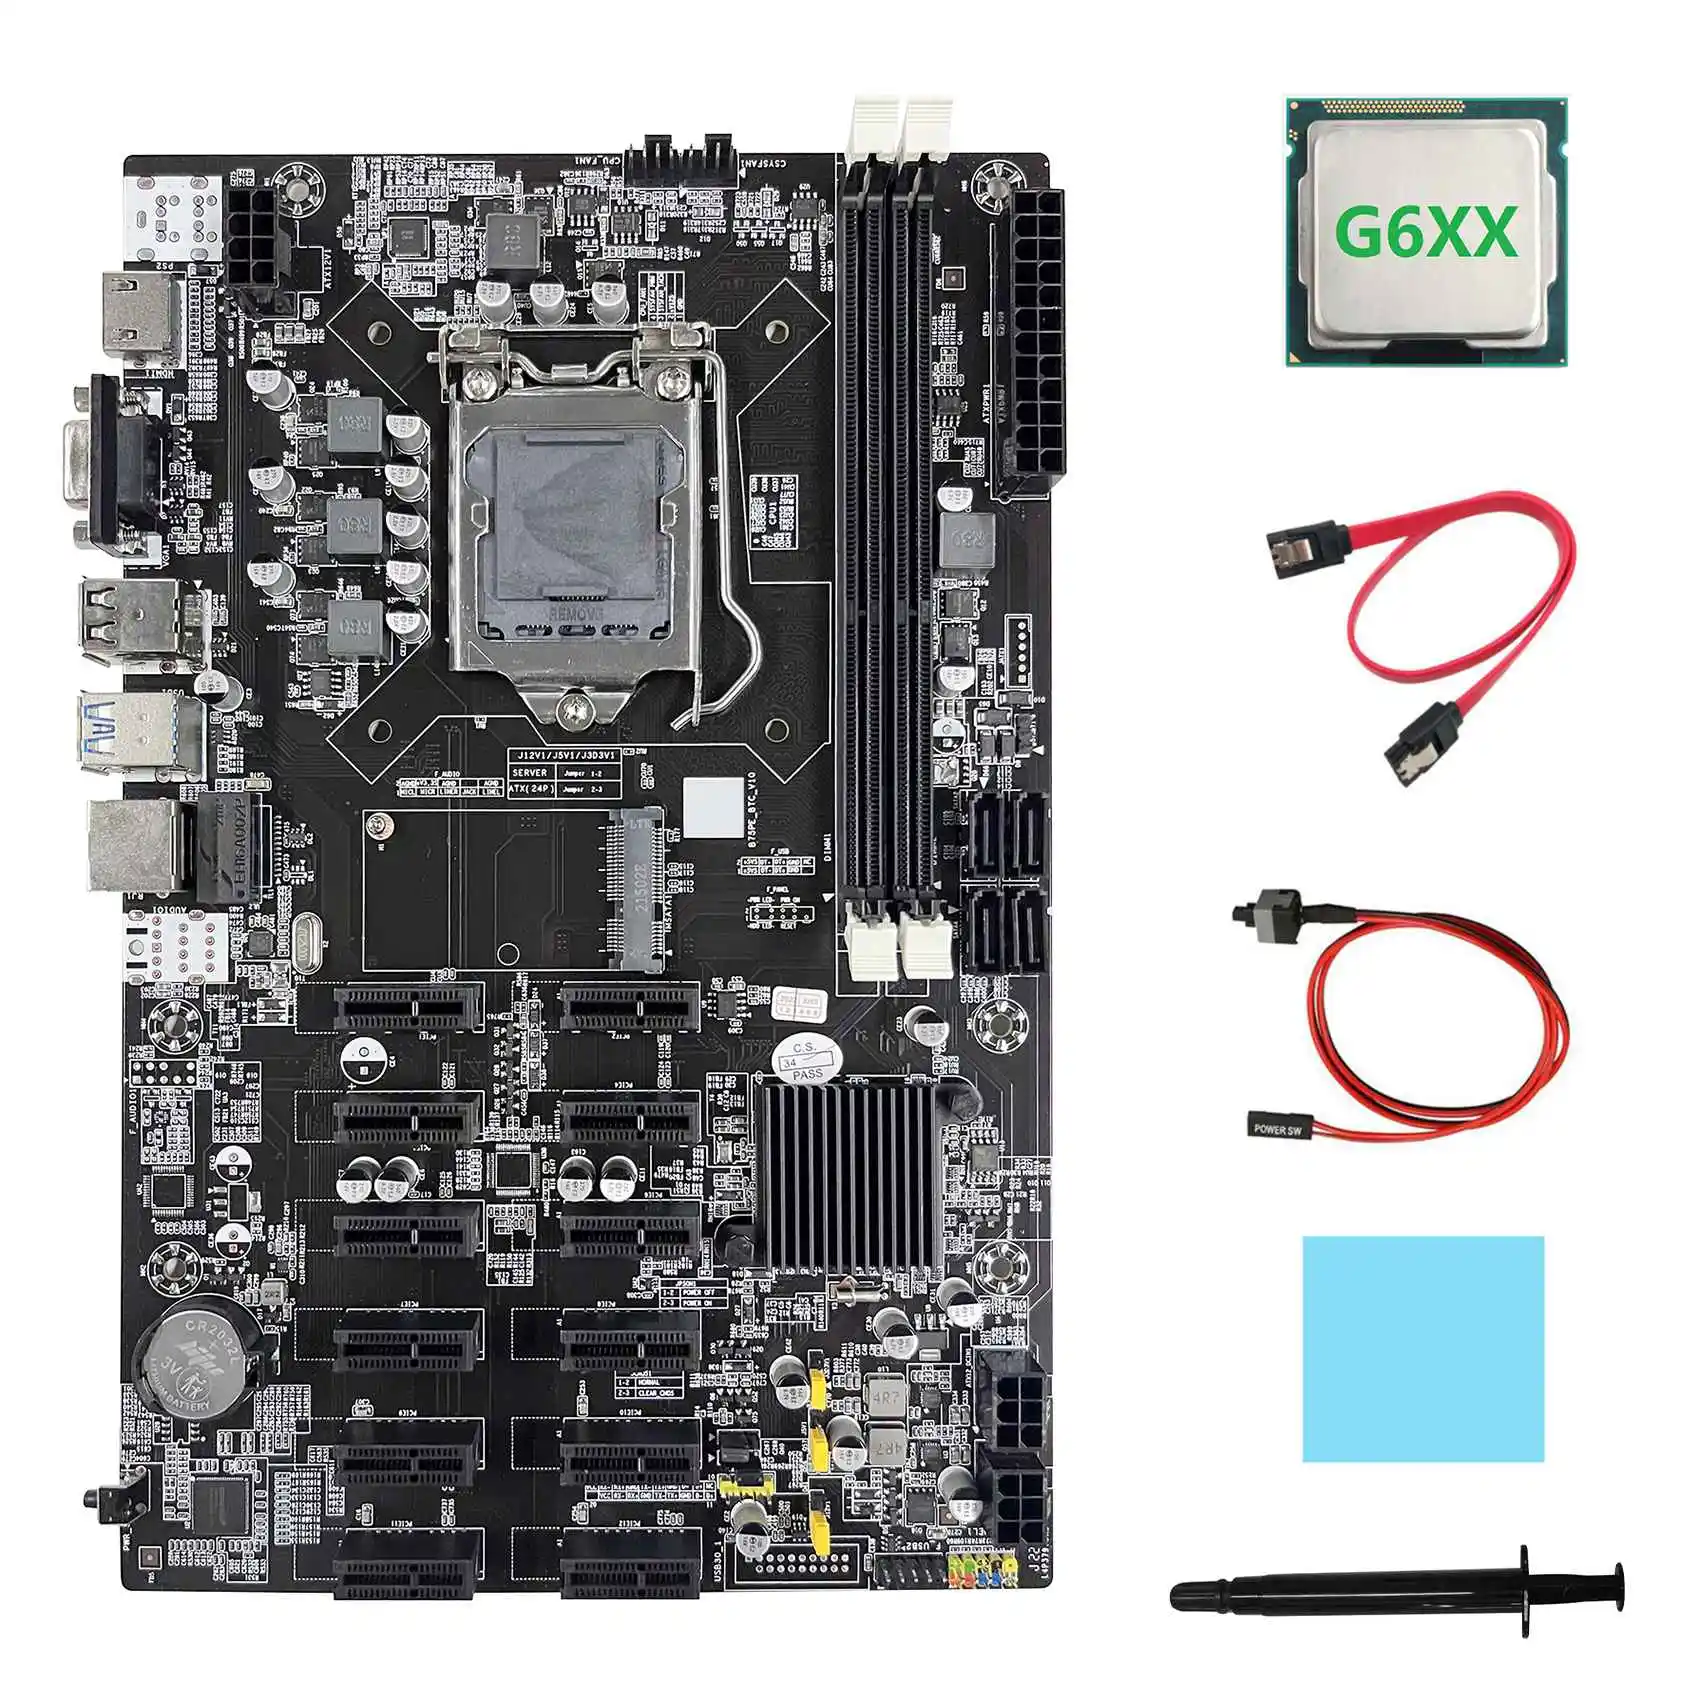 

B75 12 PCIE ETH Mining Motherboard+G6XX CPU+SATA Cable+Switch Cable+Thermal Pad+Thermal Grease BTC Miner Motherboard